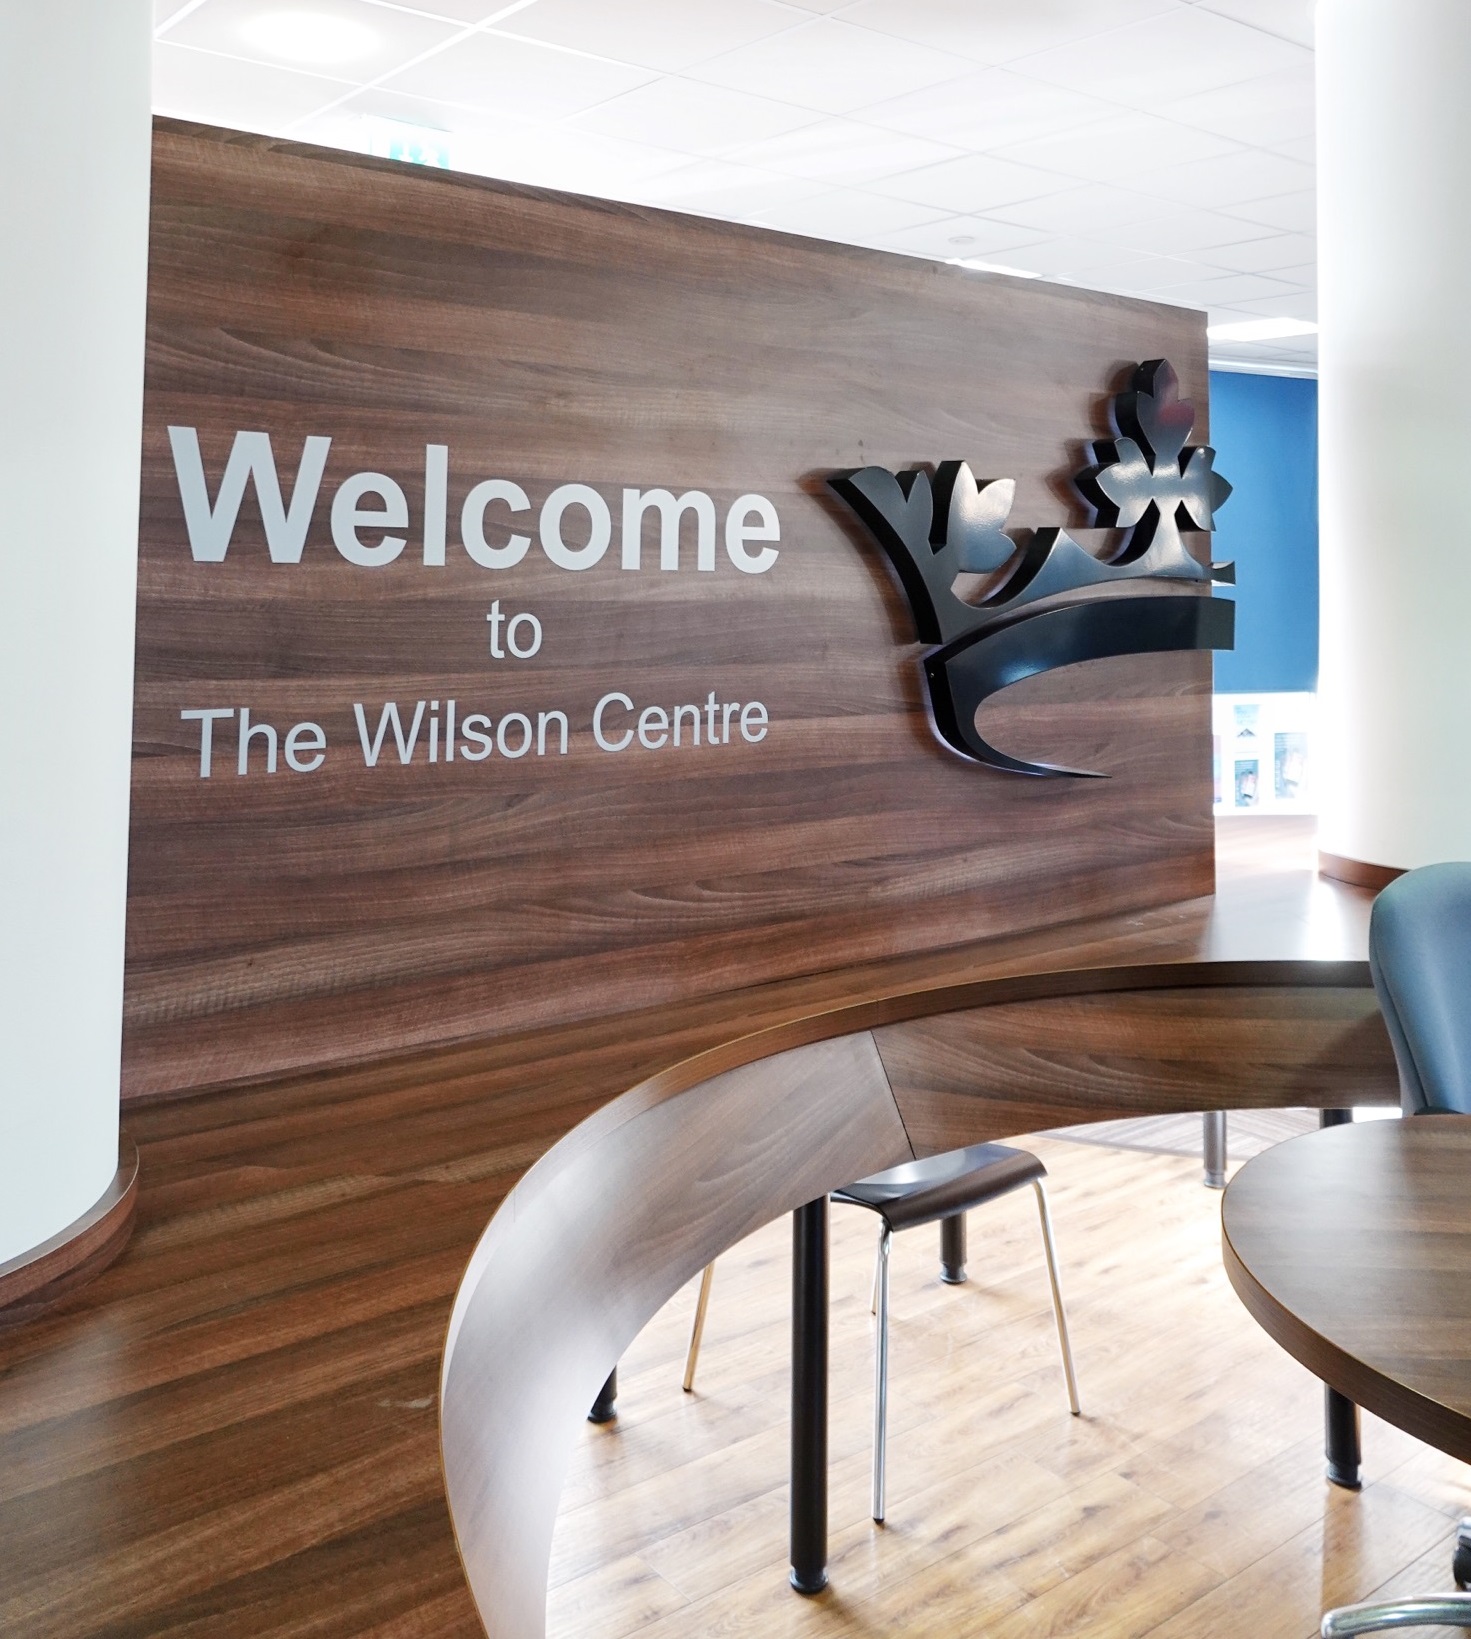 The Wilson Centre interior has been refurbished.